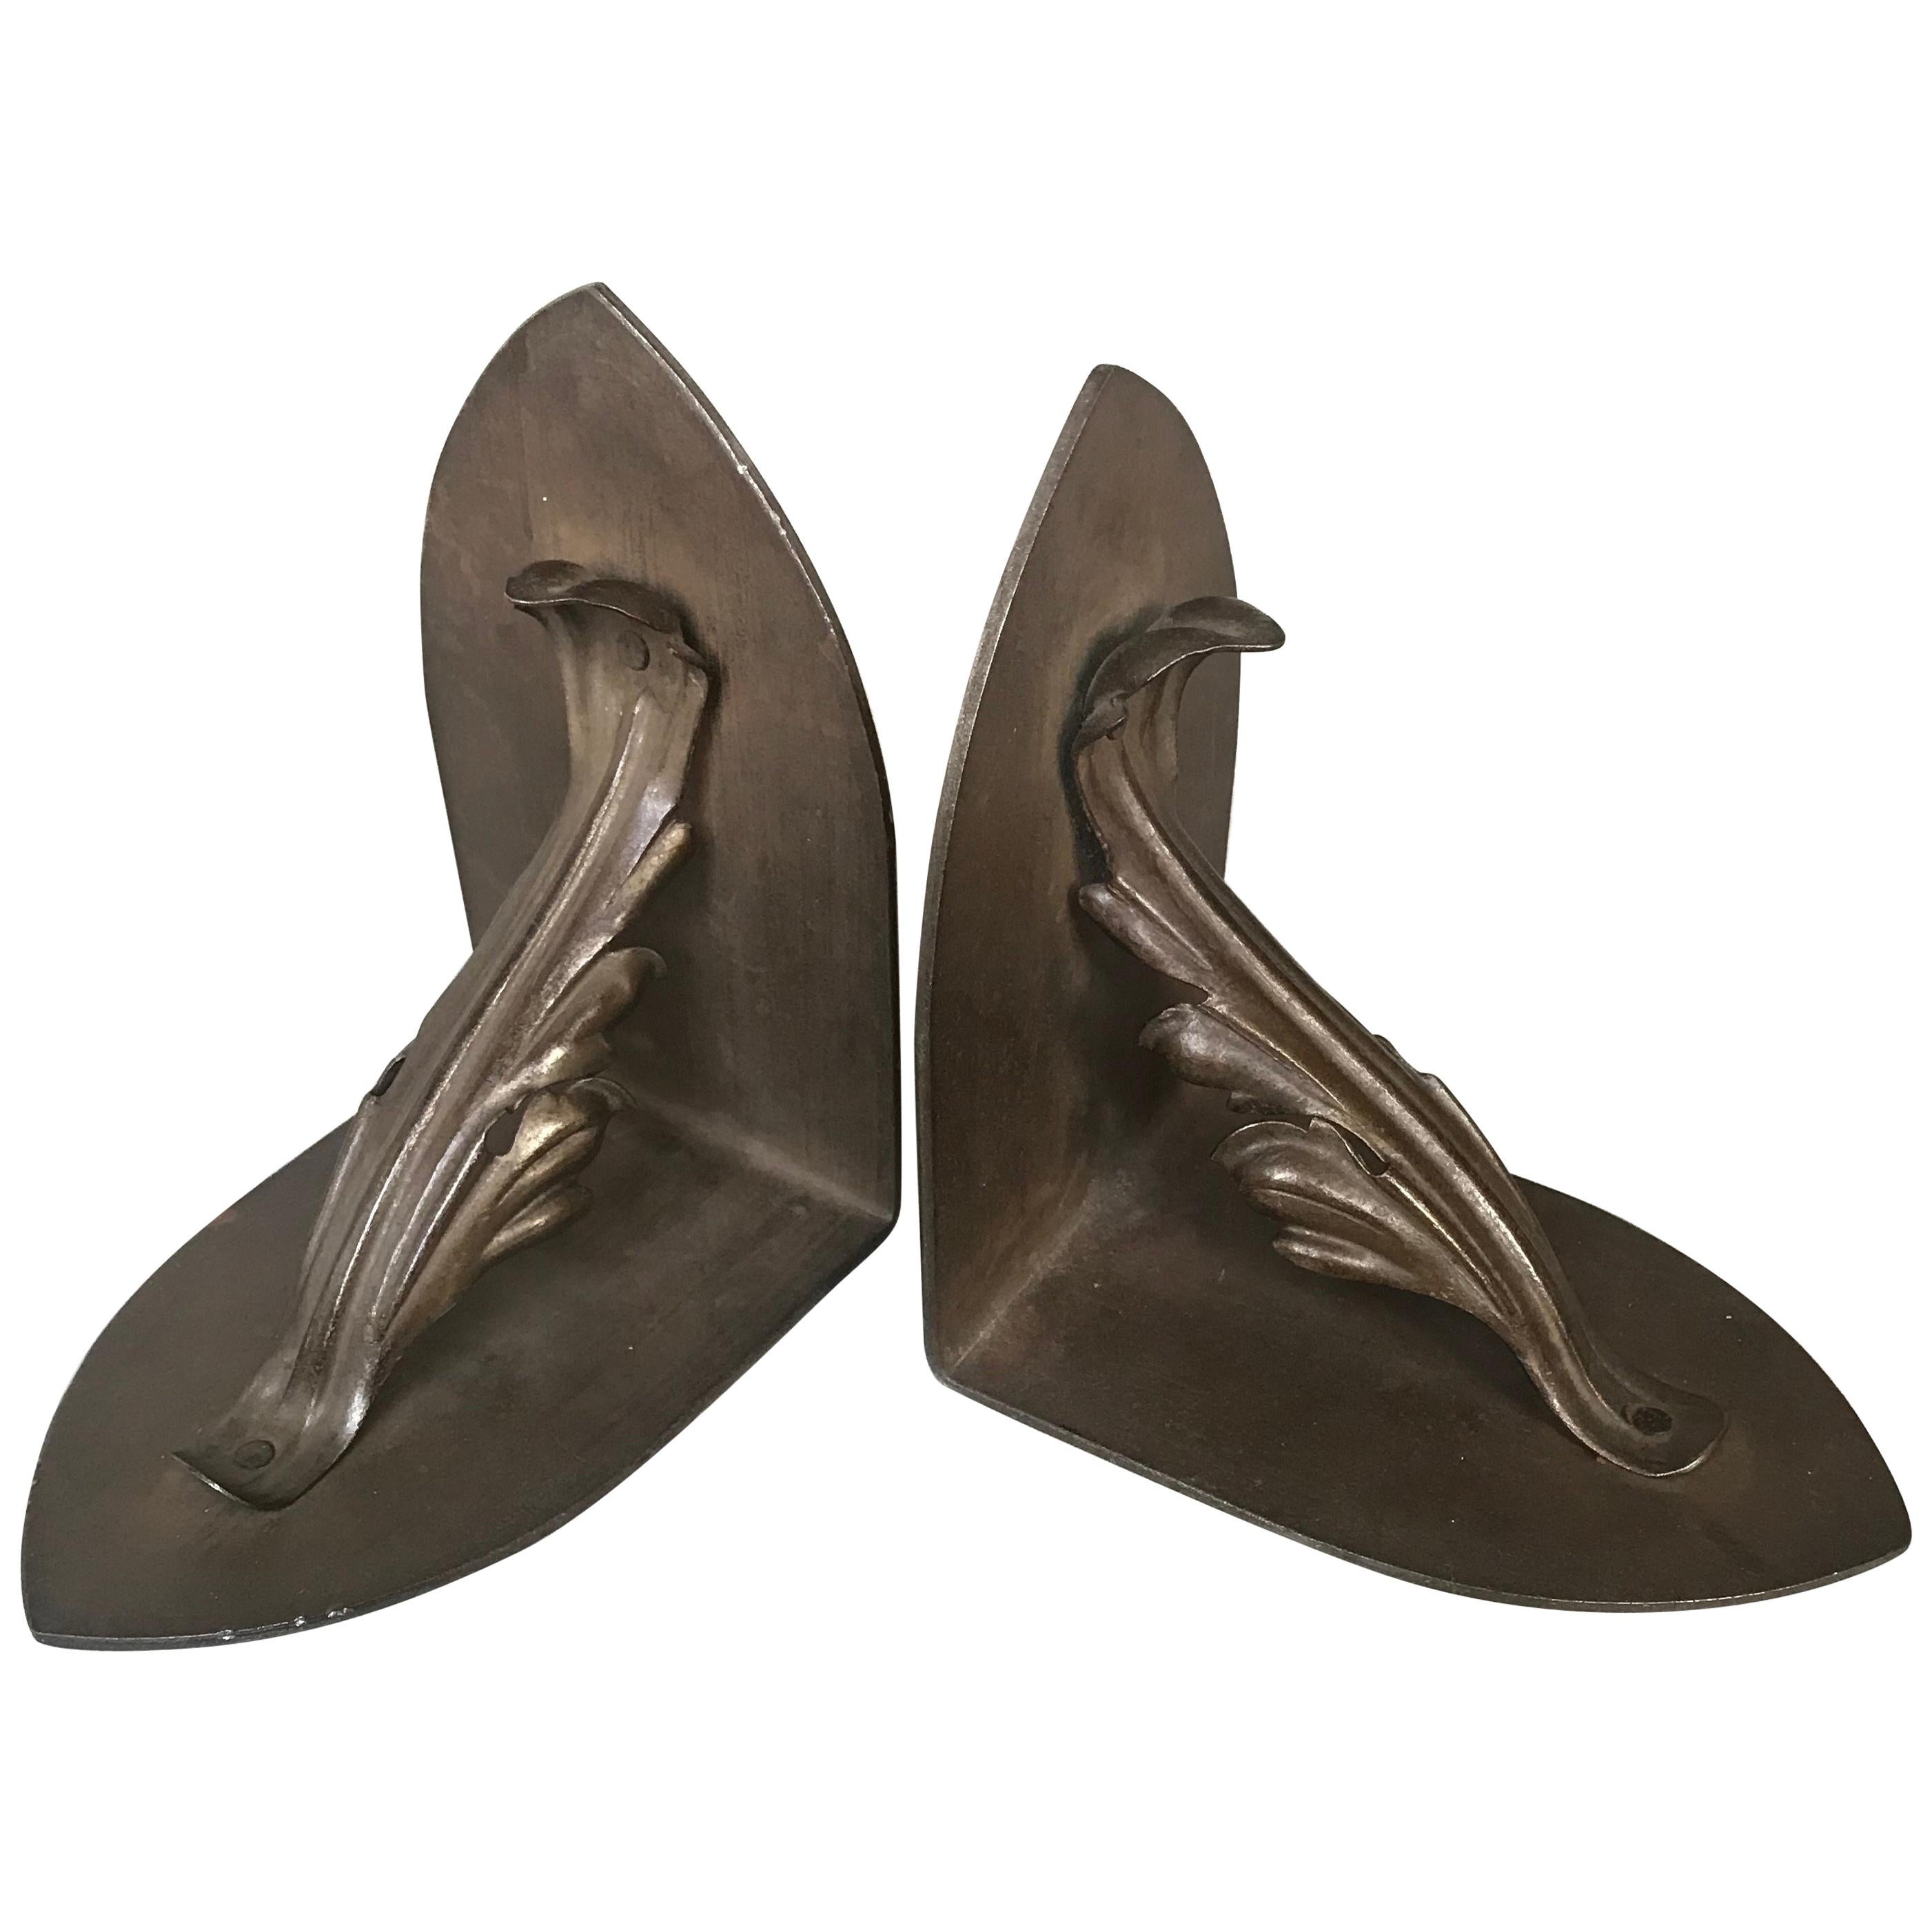 Arts & Crafts Pair of Handcrafted Metal Bookends with Meaningful Symbolic Leaves For Sale